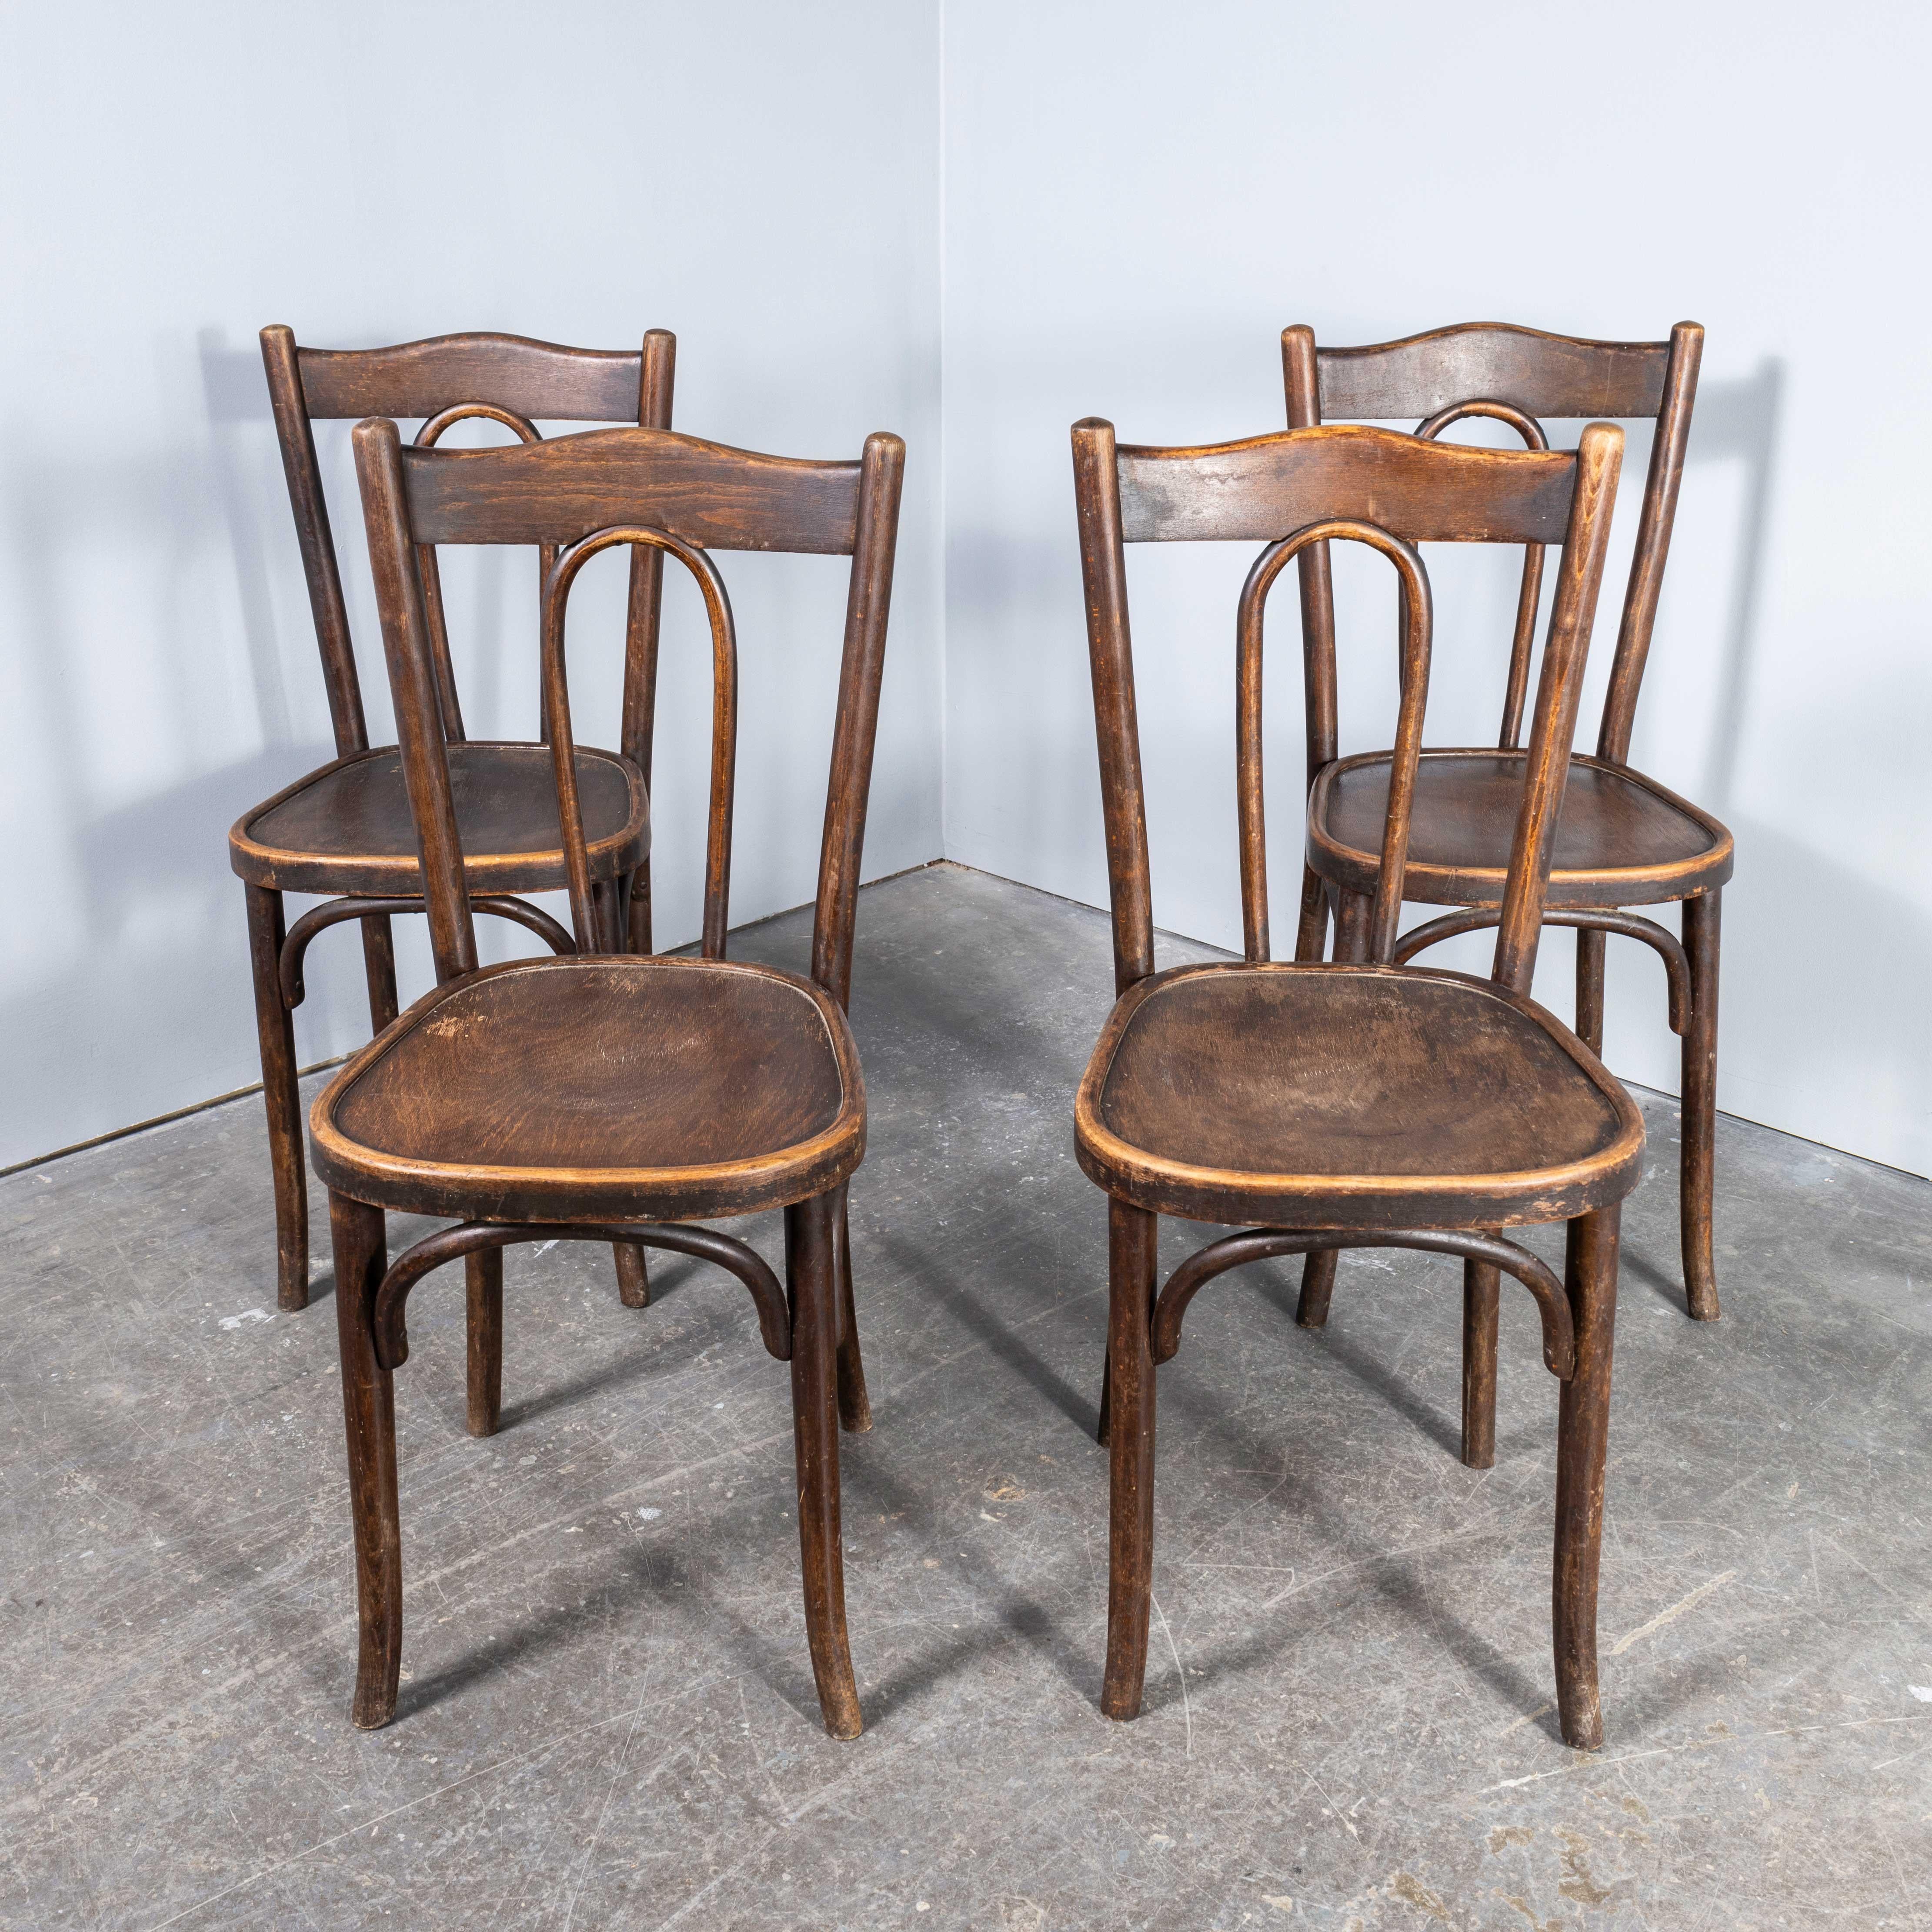 European 1910’s Bentwood Debrecen Early Hoop Back Dining Chairs – Set Of Four